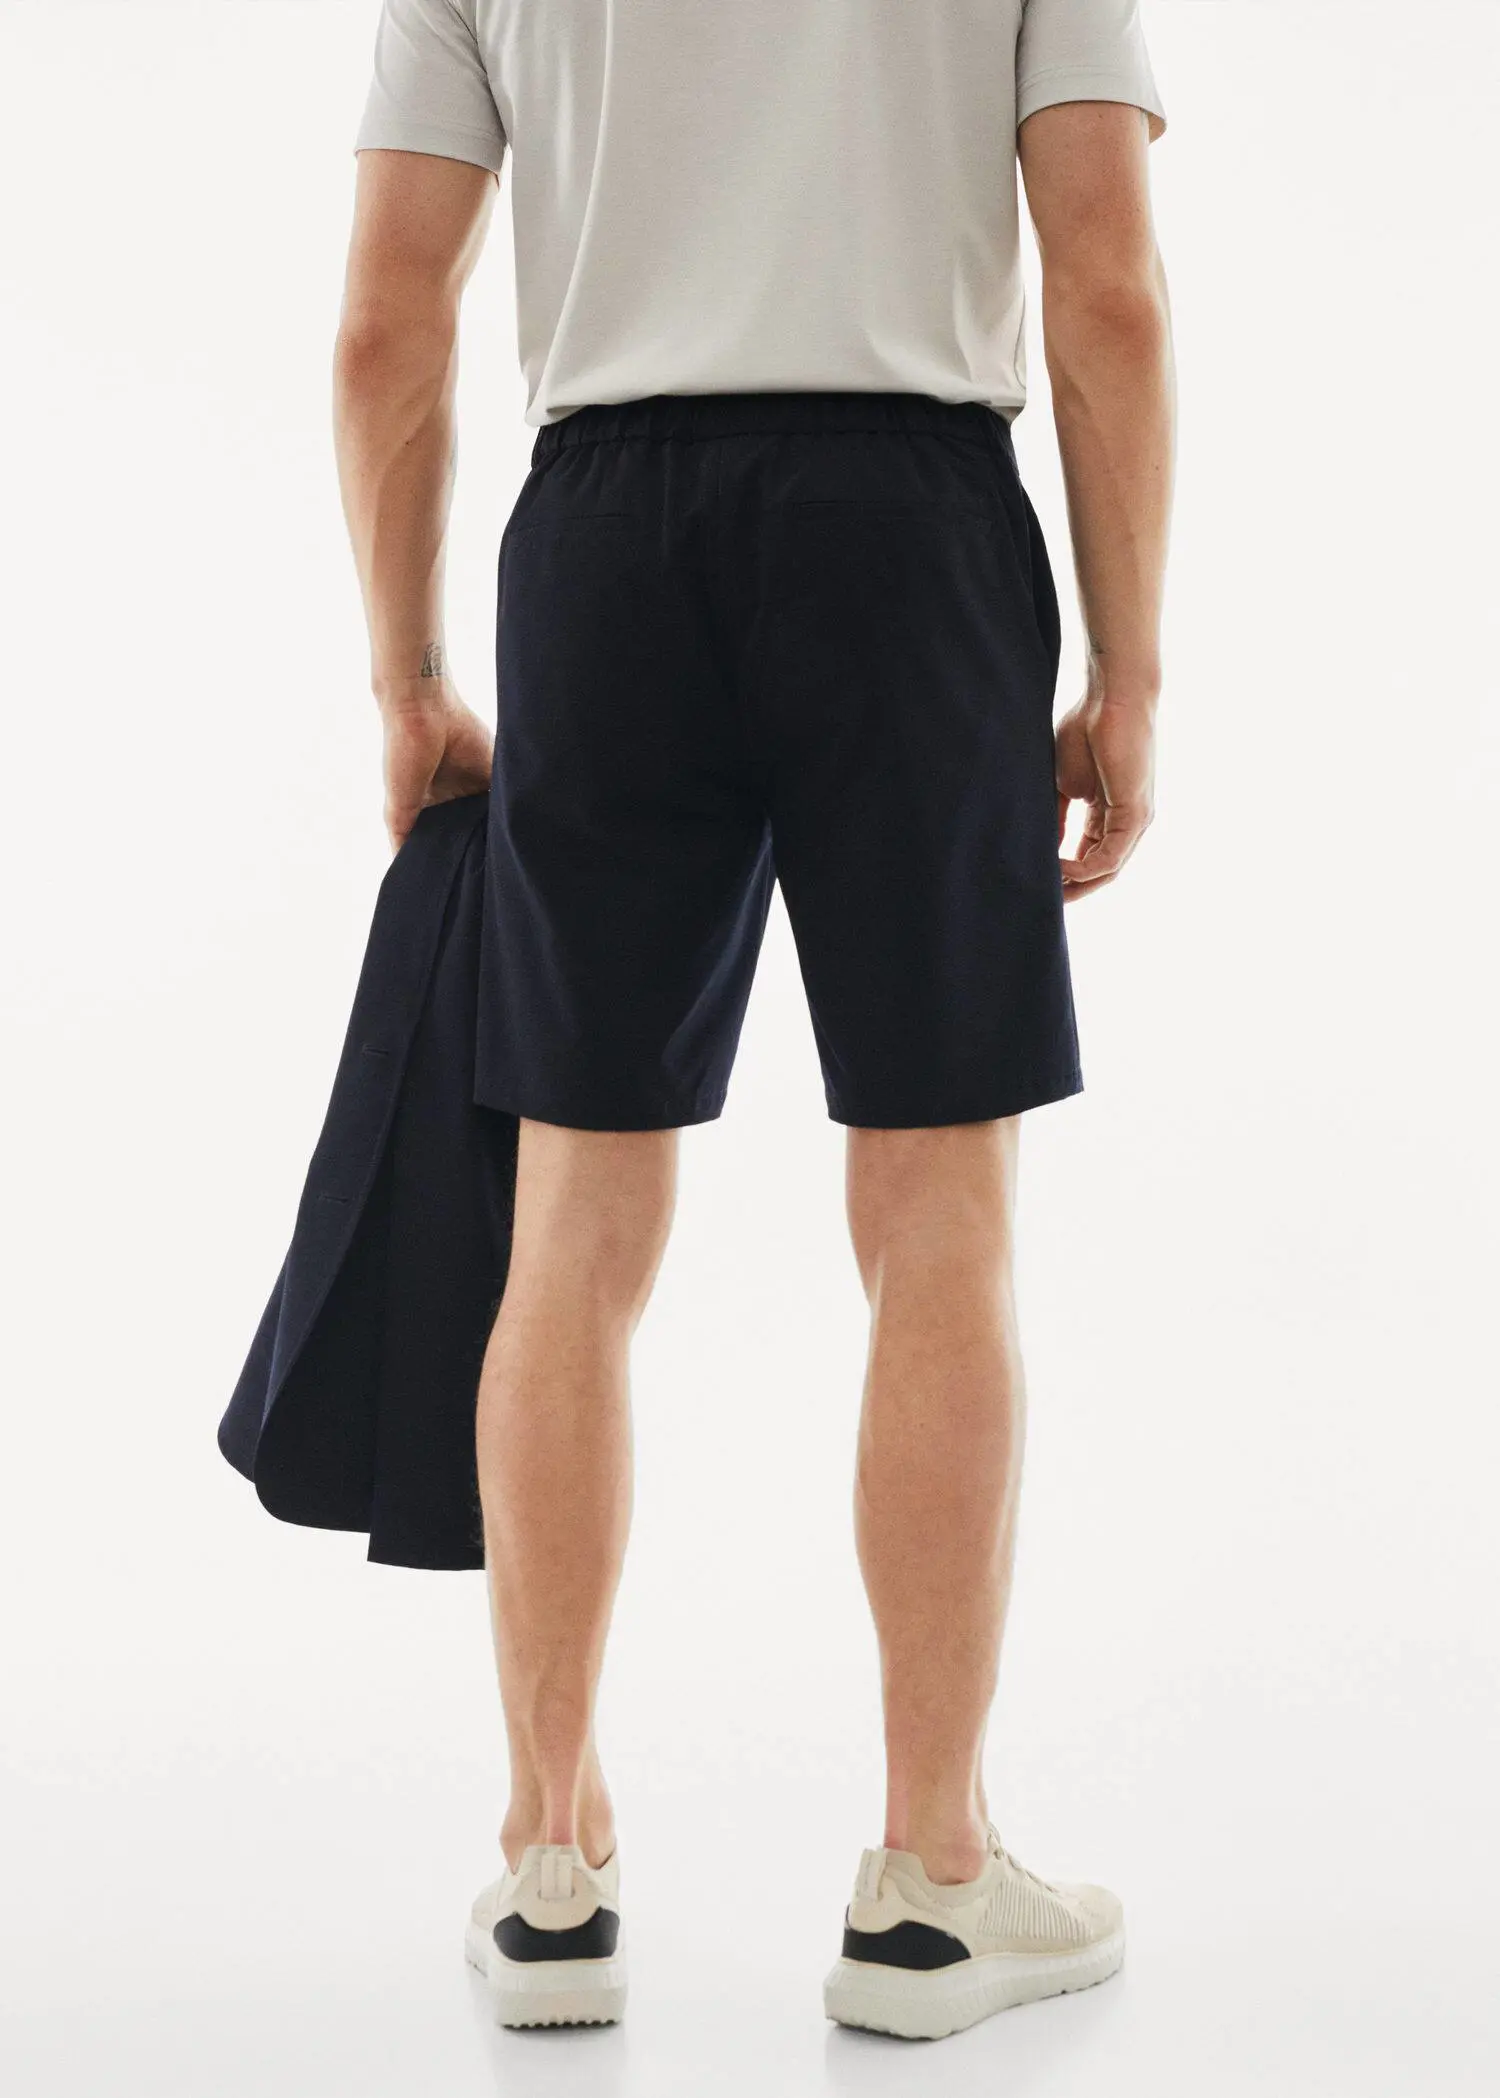 Mango Water-repellent stretch shorts. a man in black shorts and a white t-shirt 